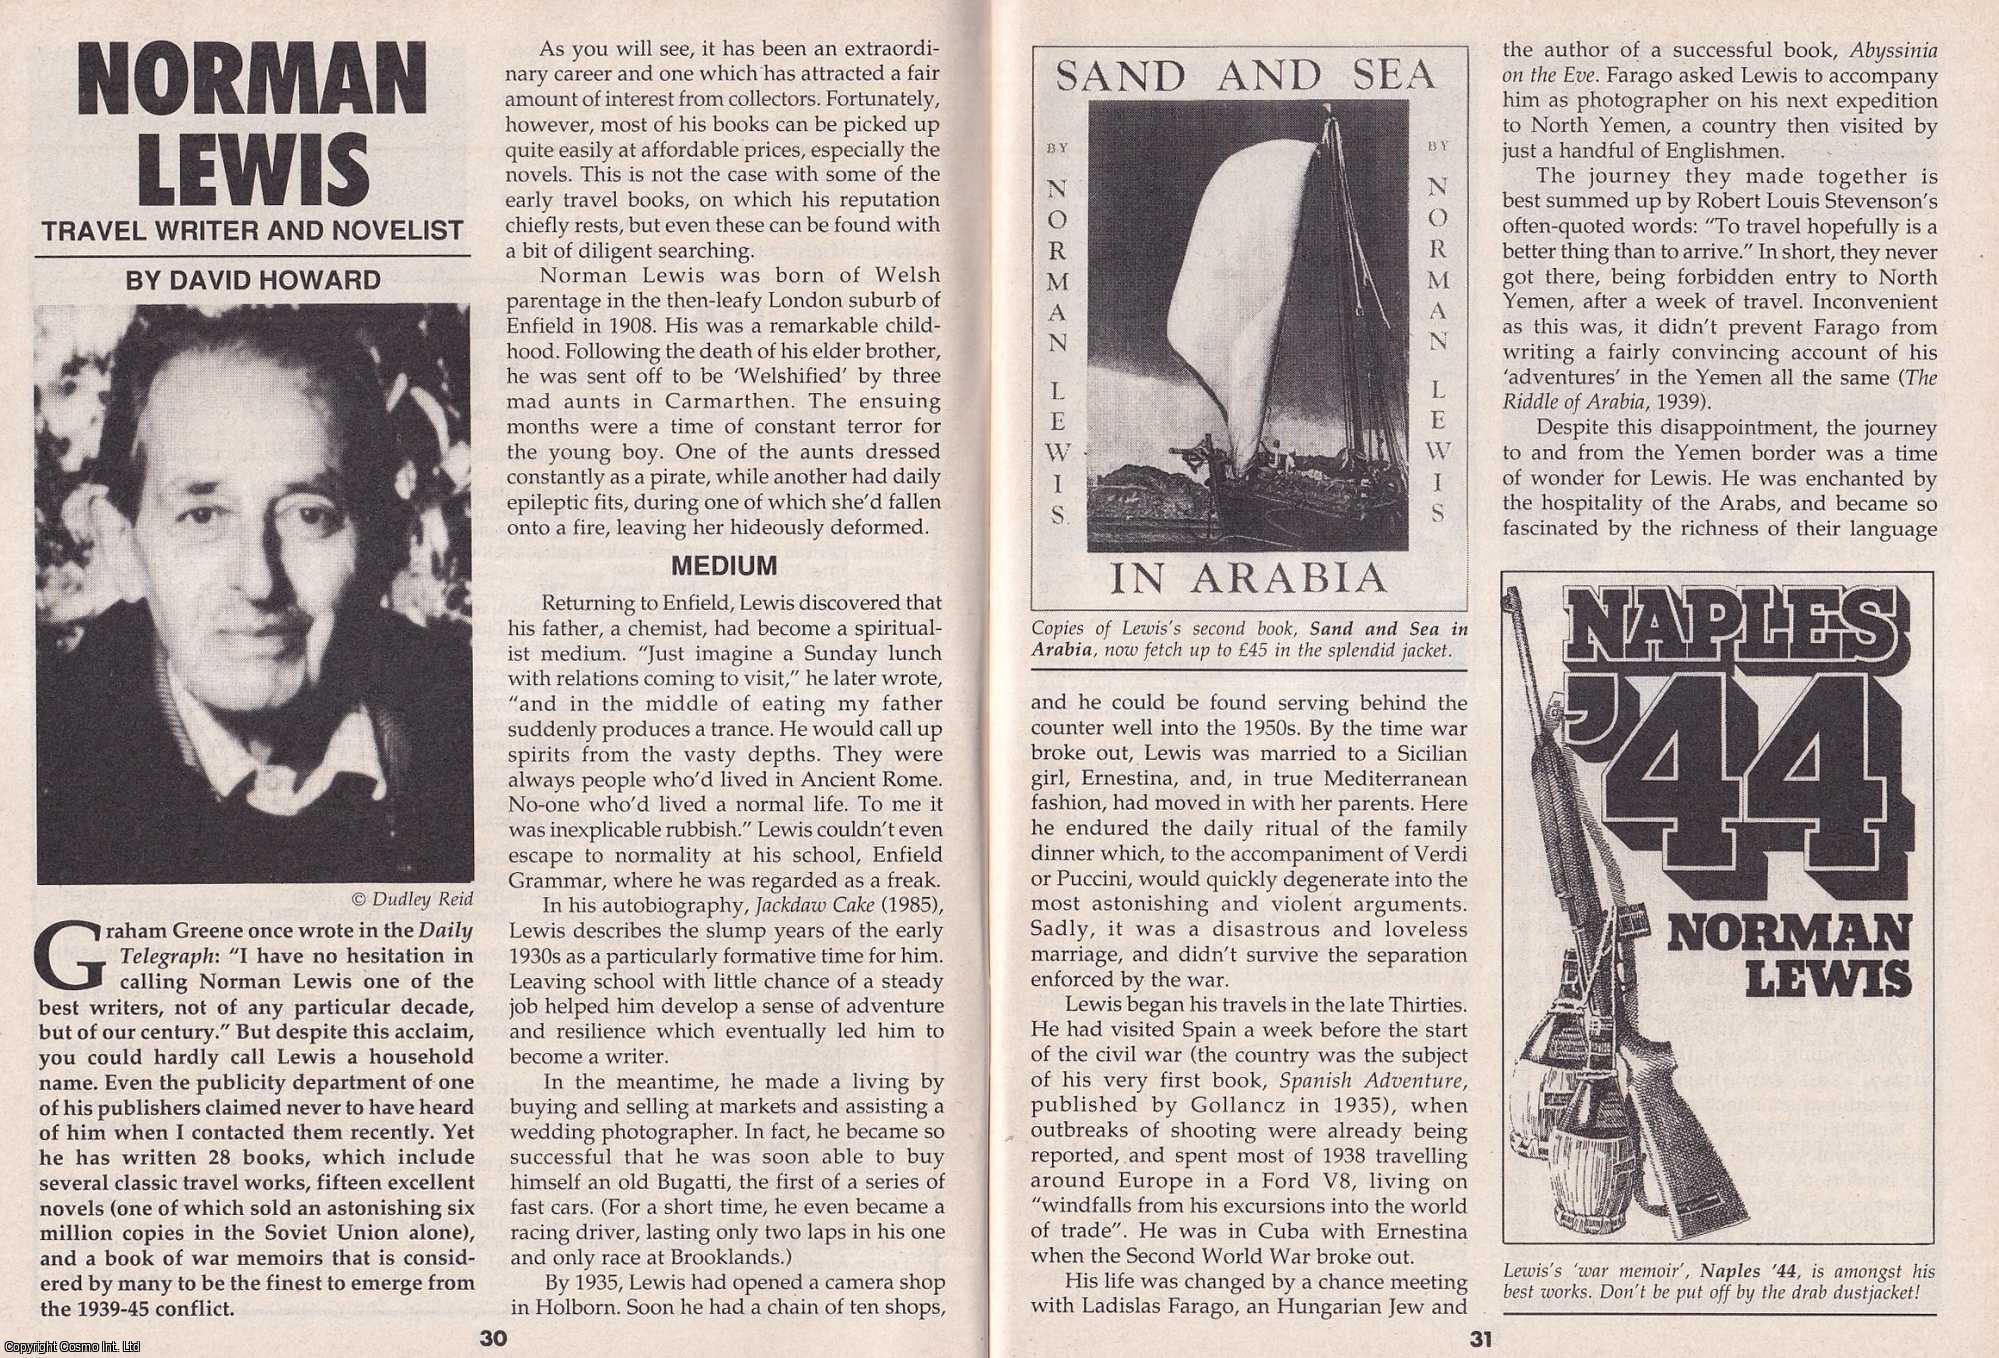 David Howard - Norman Lewis. Travel Writer and Novelist. This is an original article separated from an issue of The Book & Magazine Collector publication, 1994.